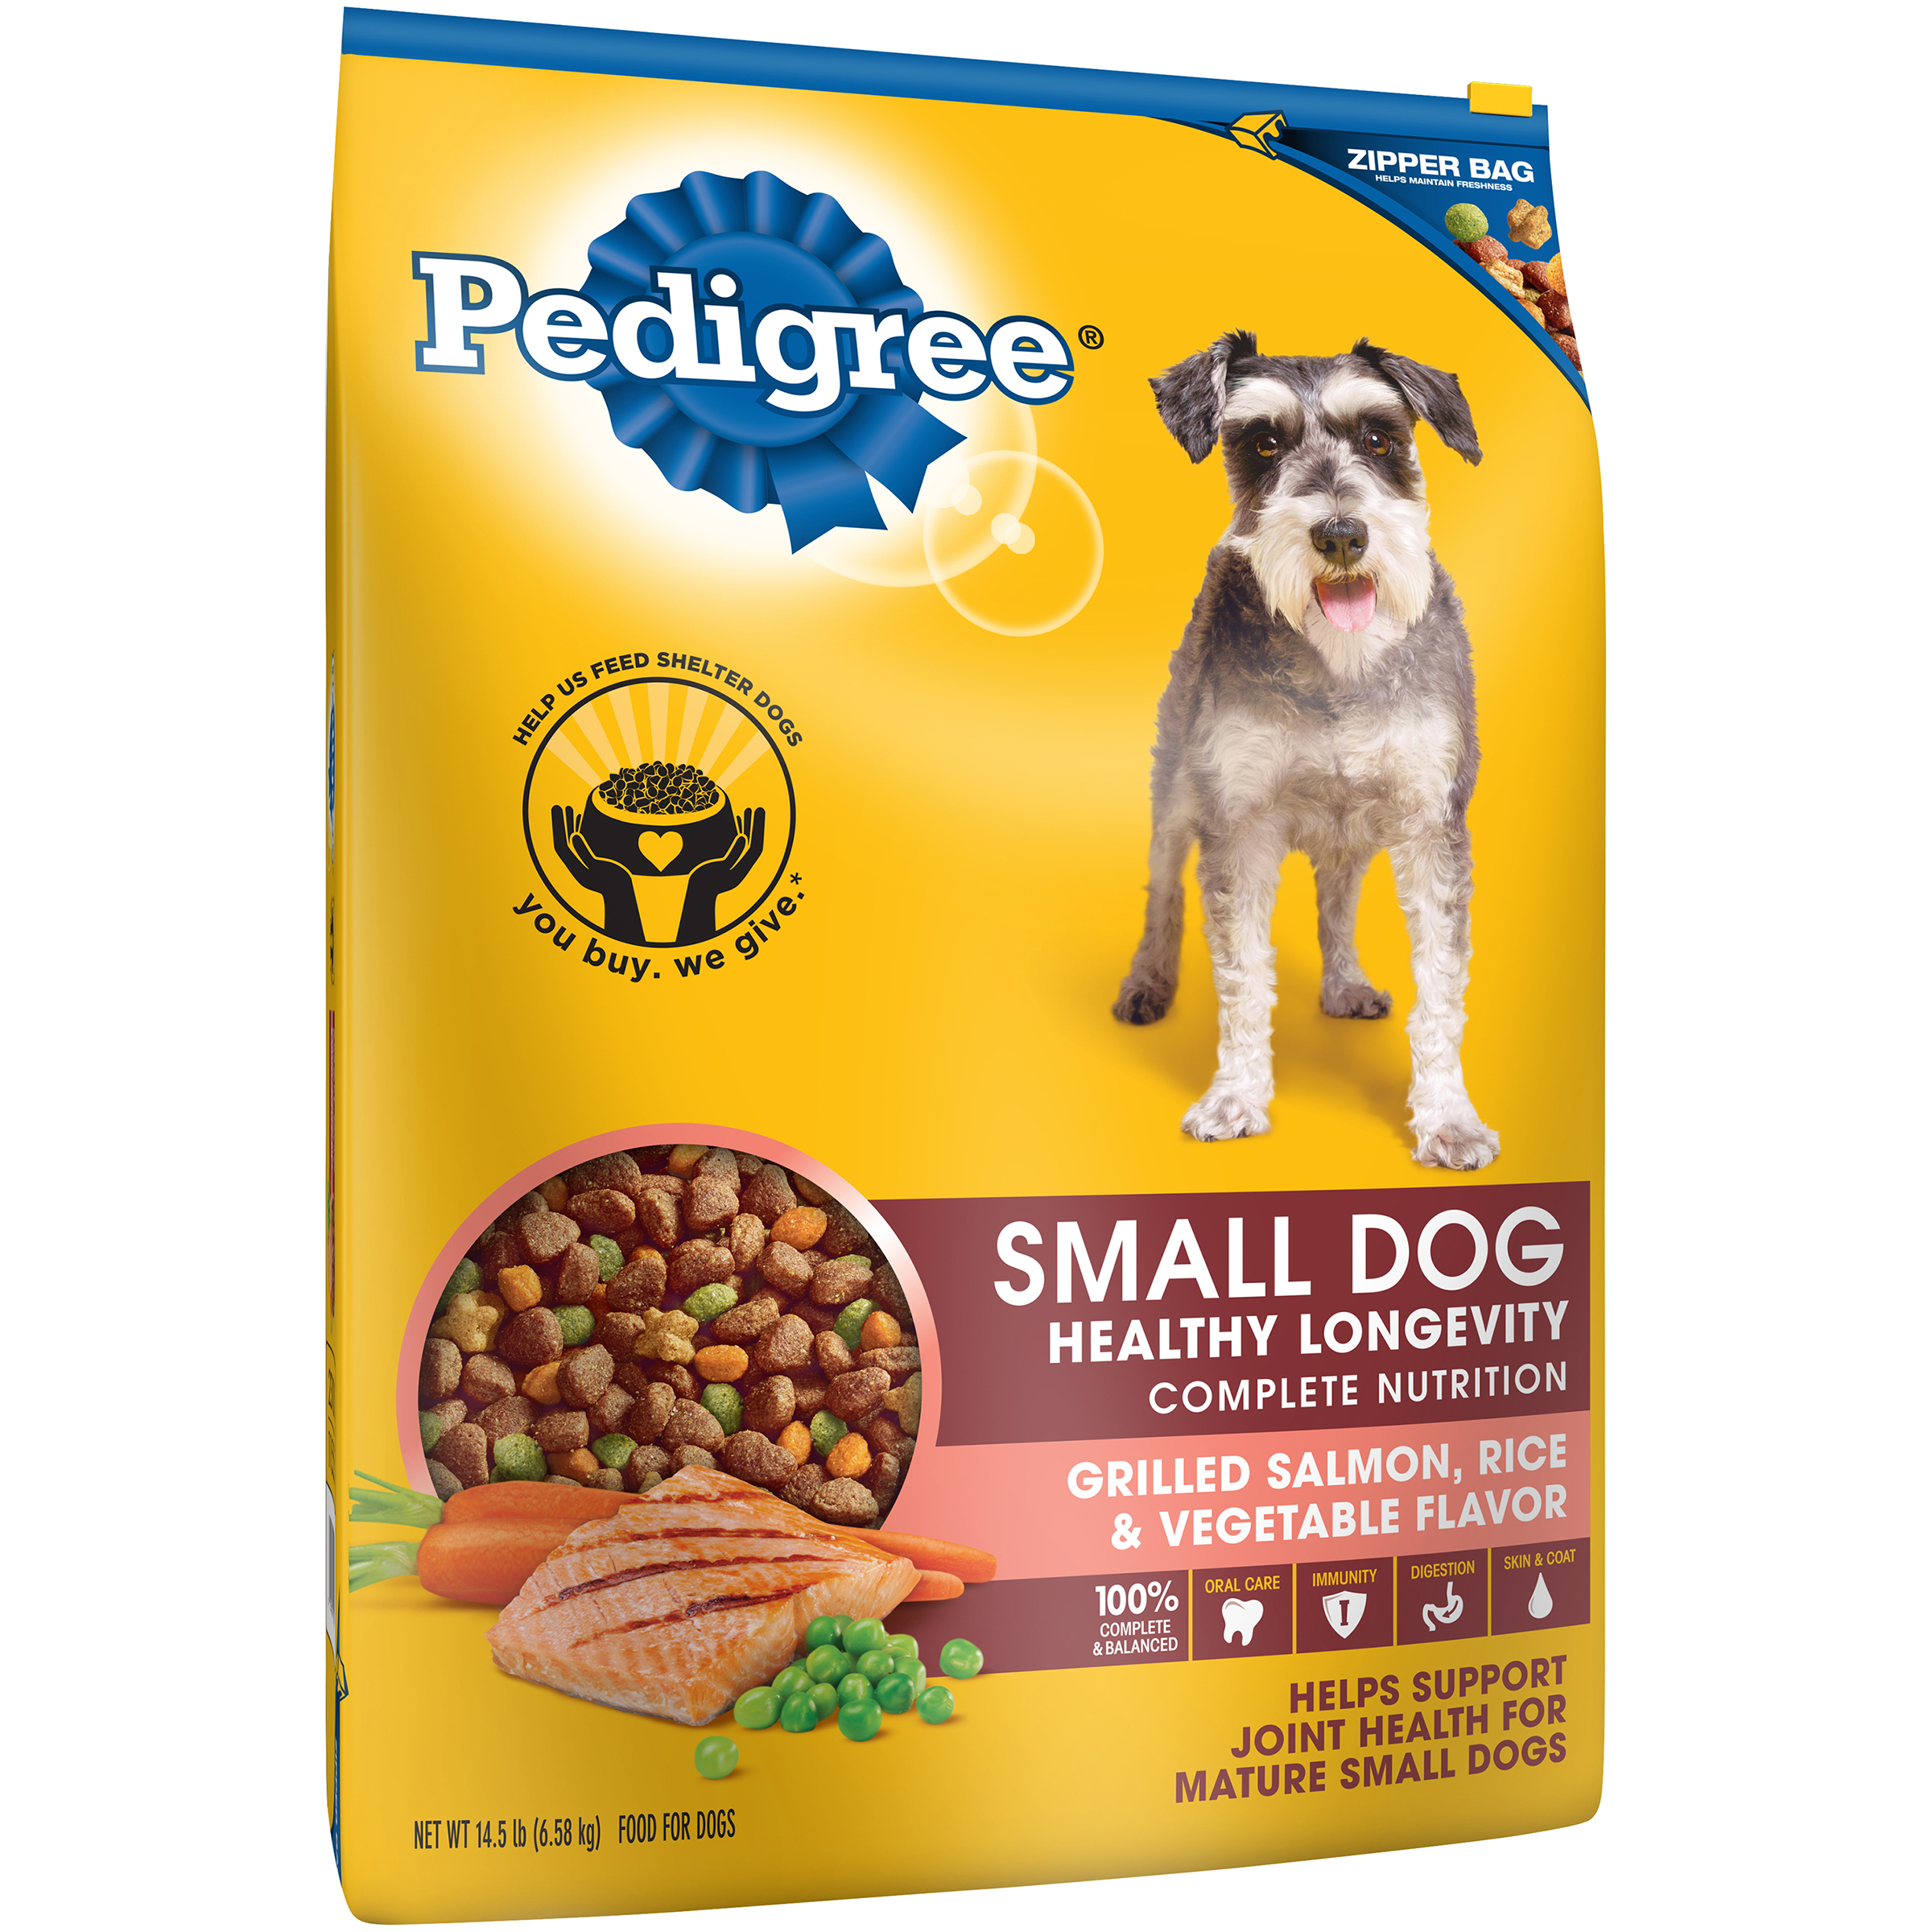 0023100115559 - COMPLETE NUTRITION SMALL DOG HEALTHY LONGEVITY GRILLED SALMON RICE & VEGETABLE FLAVOR DOG FOOD 14.5 LB BAG